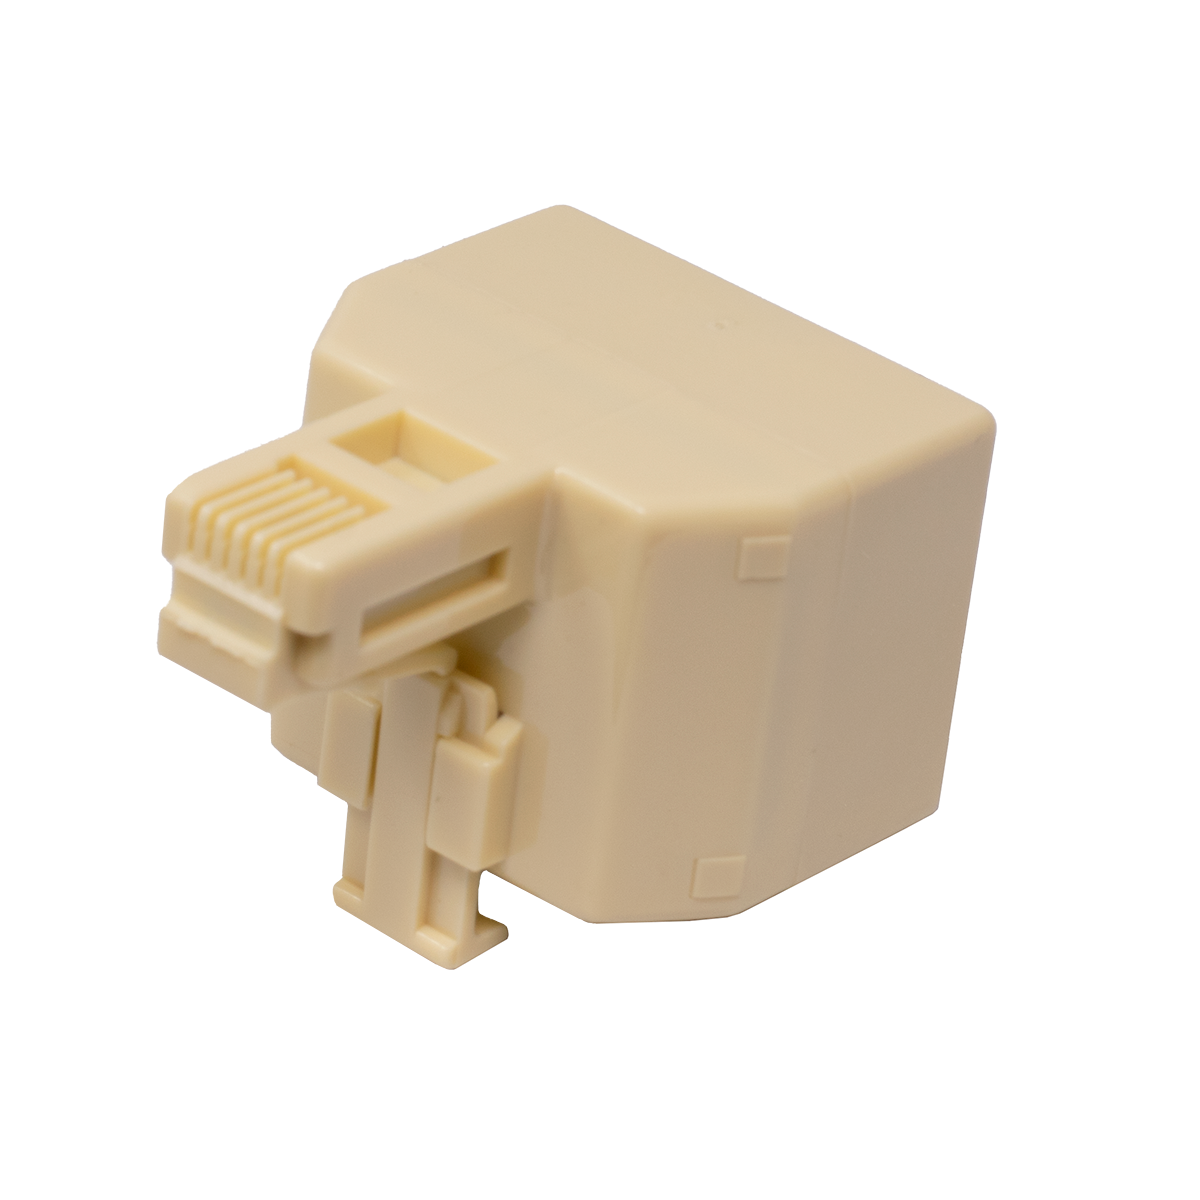 Line 1 Line 2 T Adapter (Plug View)